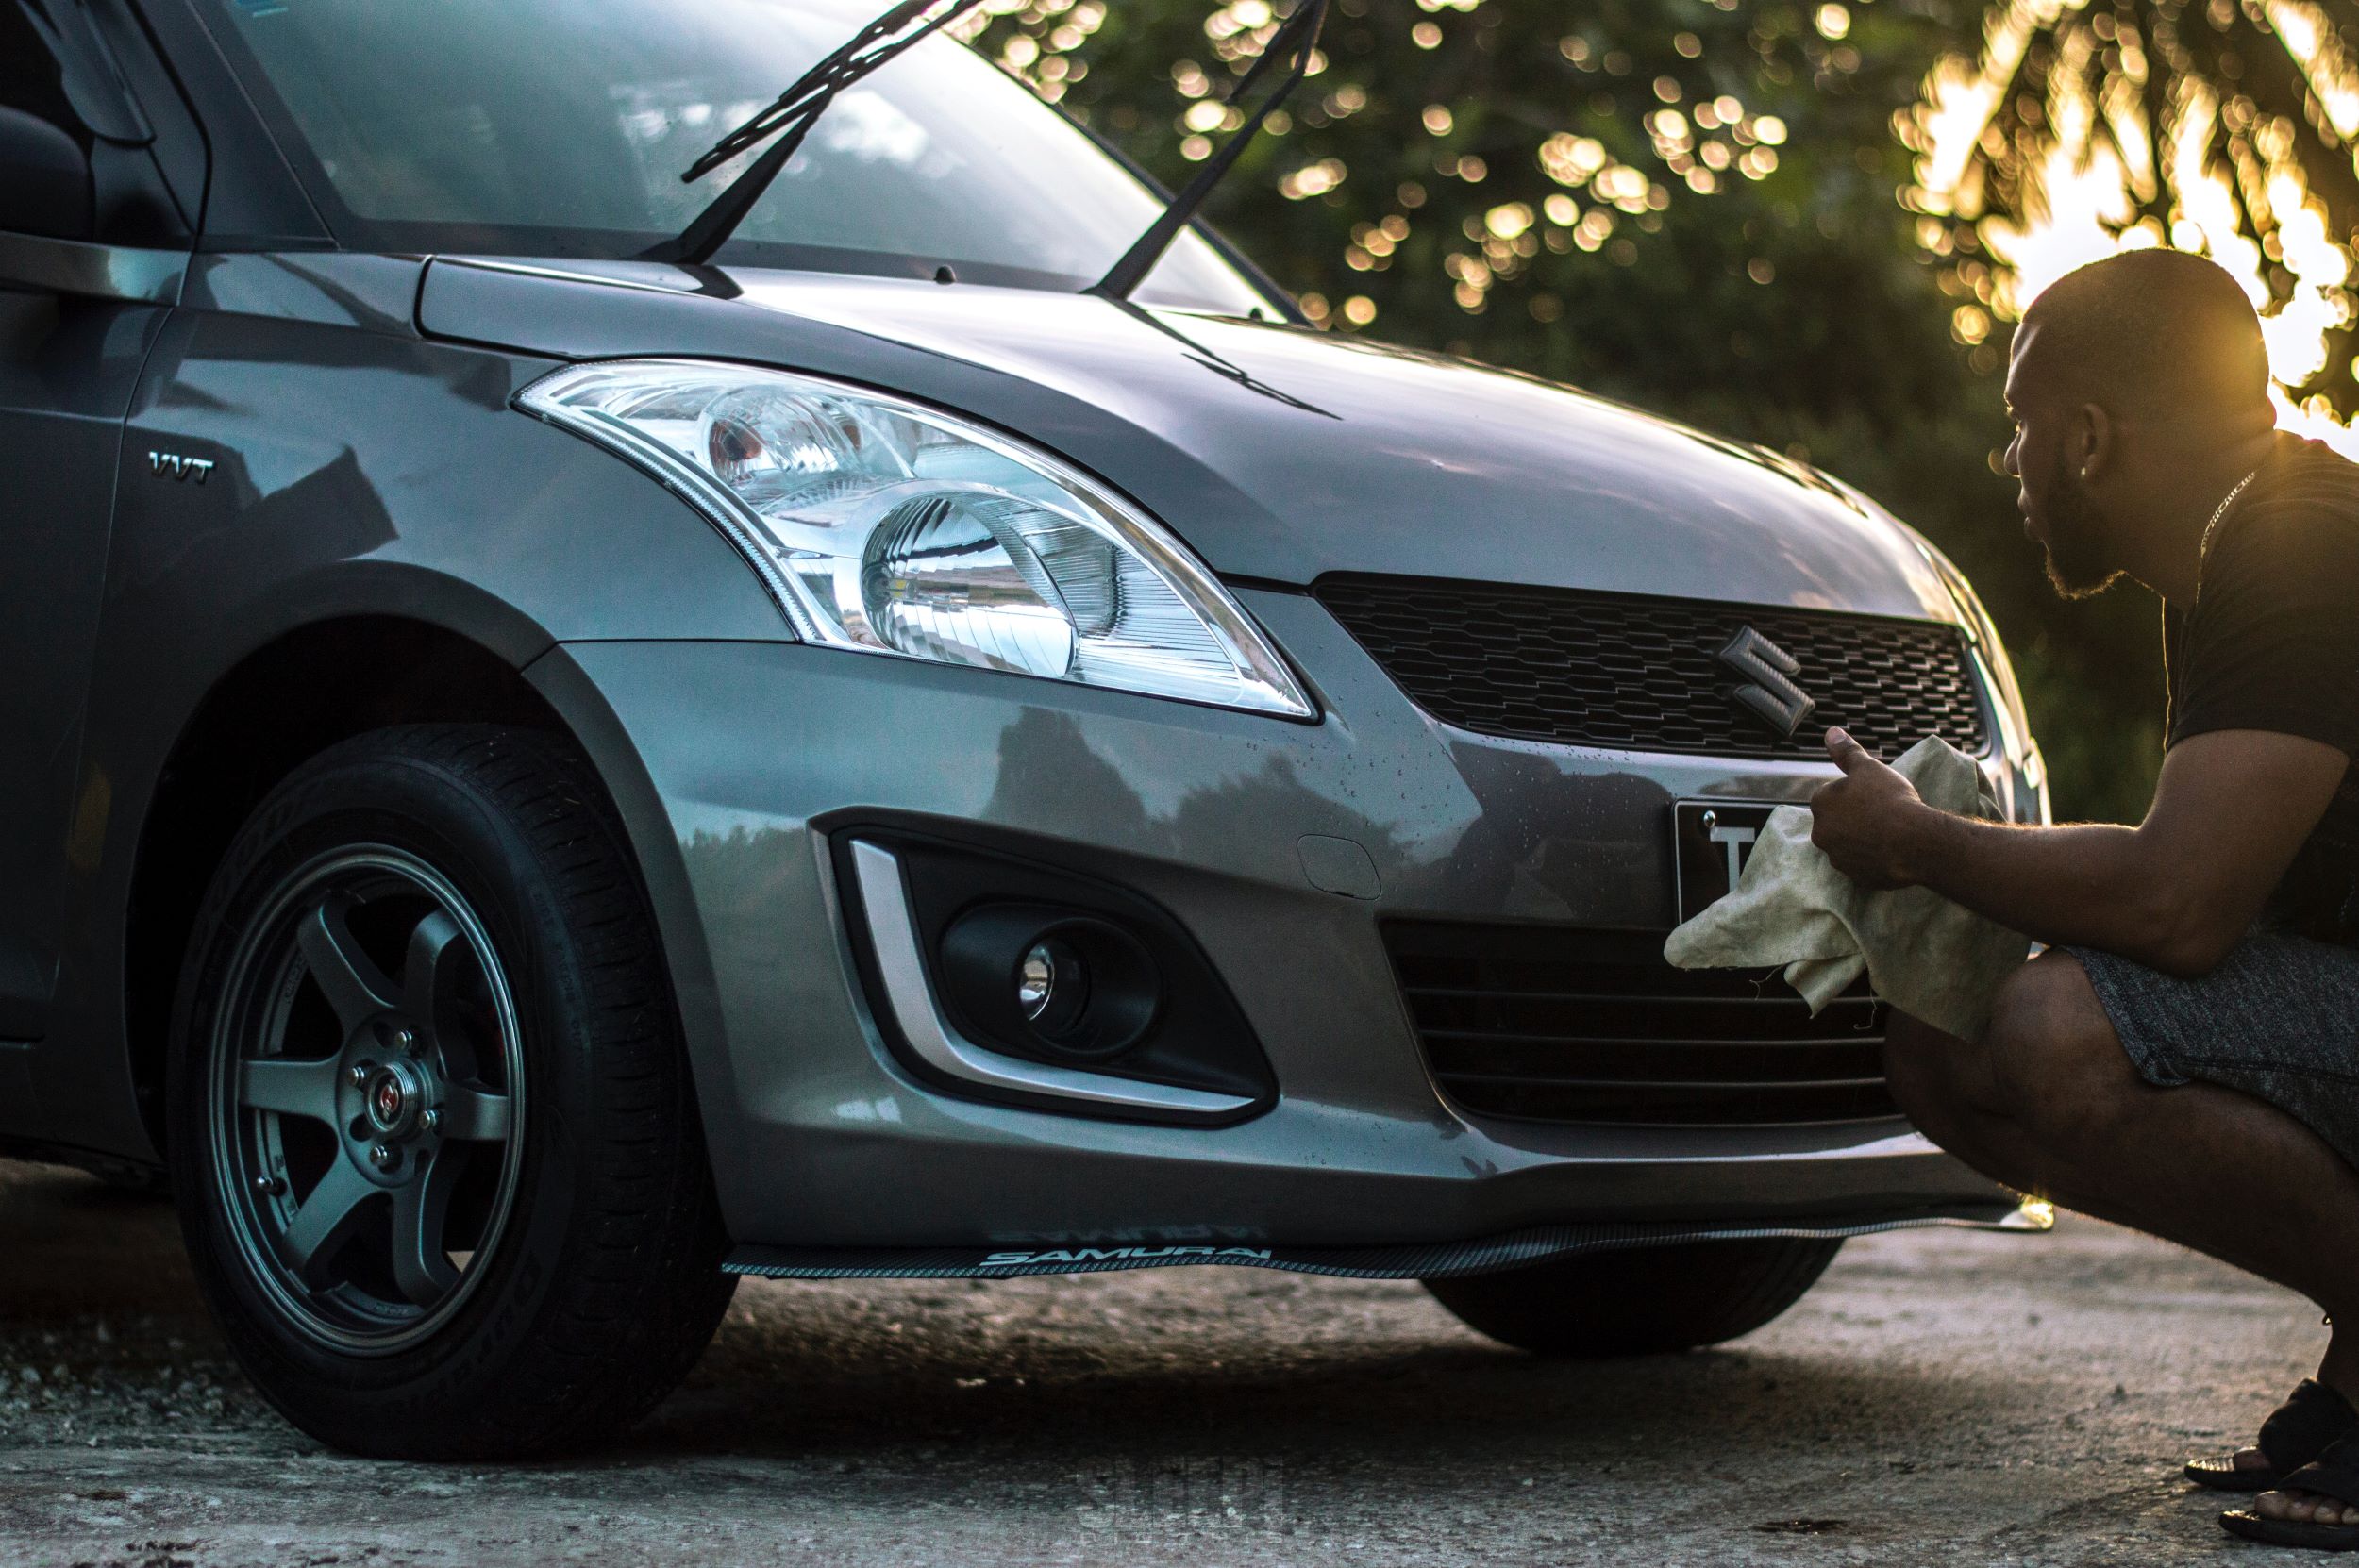 10 Simple Tips to Remove Bird Poop Stains From Your Car